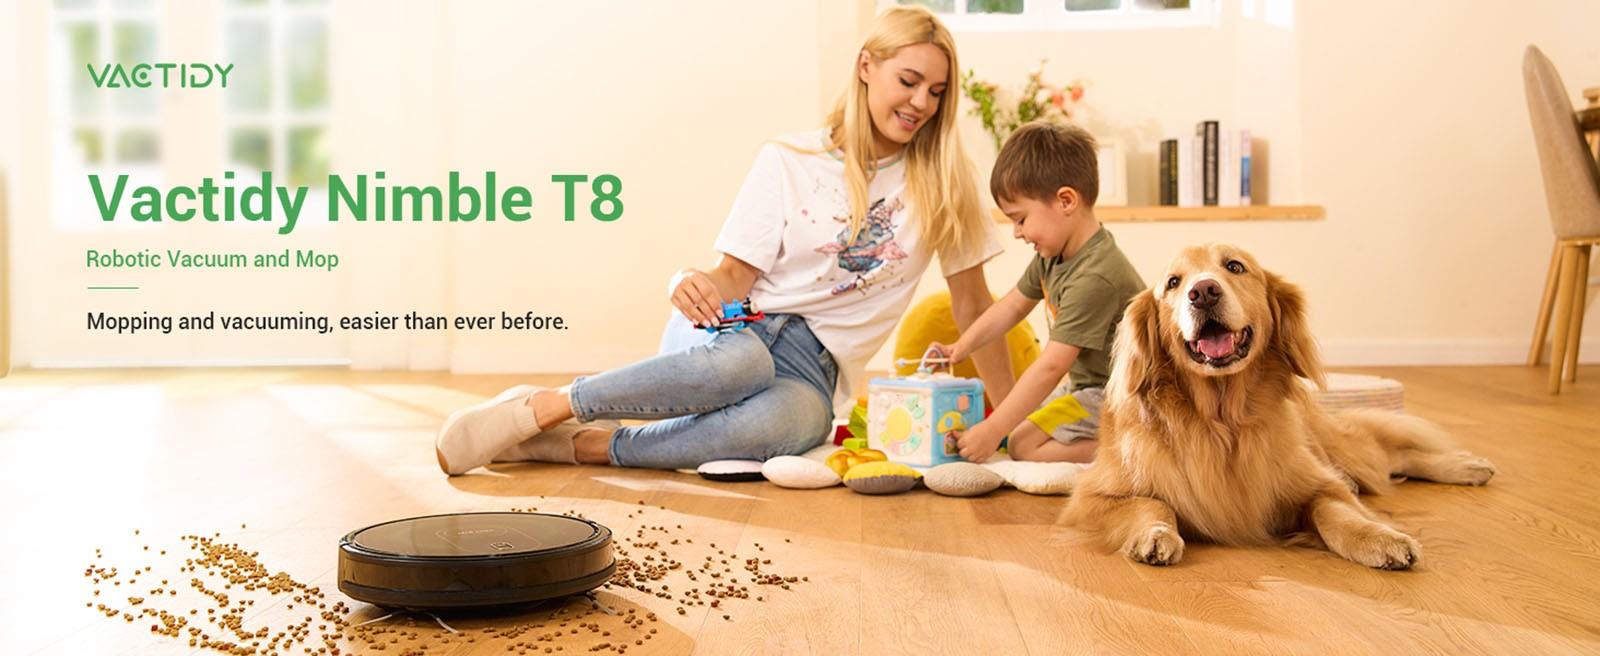 Vactidy T8 Robot Vacuum Cleaner, 2 in 1 Mopping Vacuum, 3000Pa Suction, 250ml Dust Bin, Carpet Detection, App Control